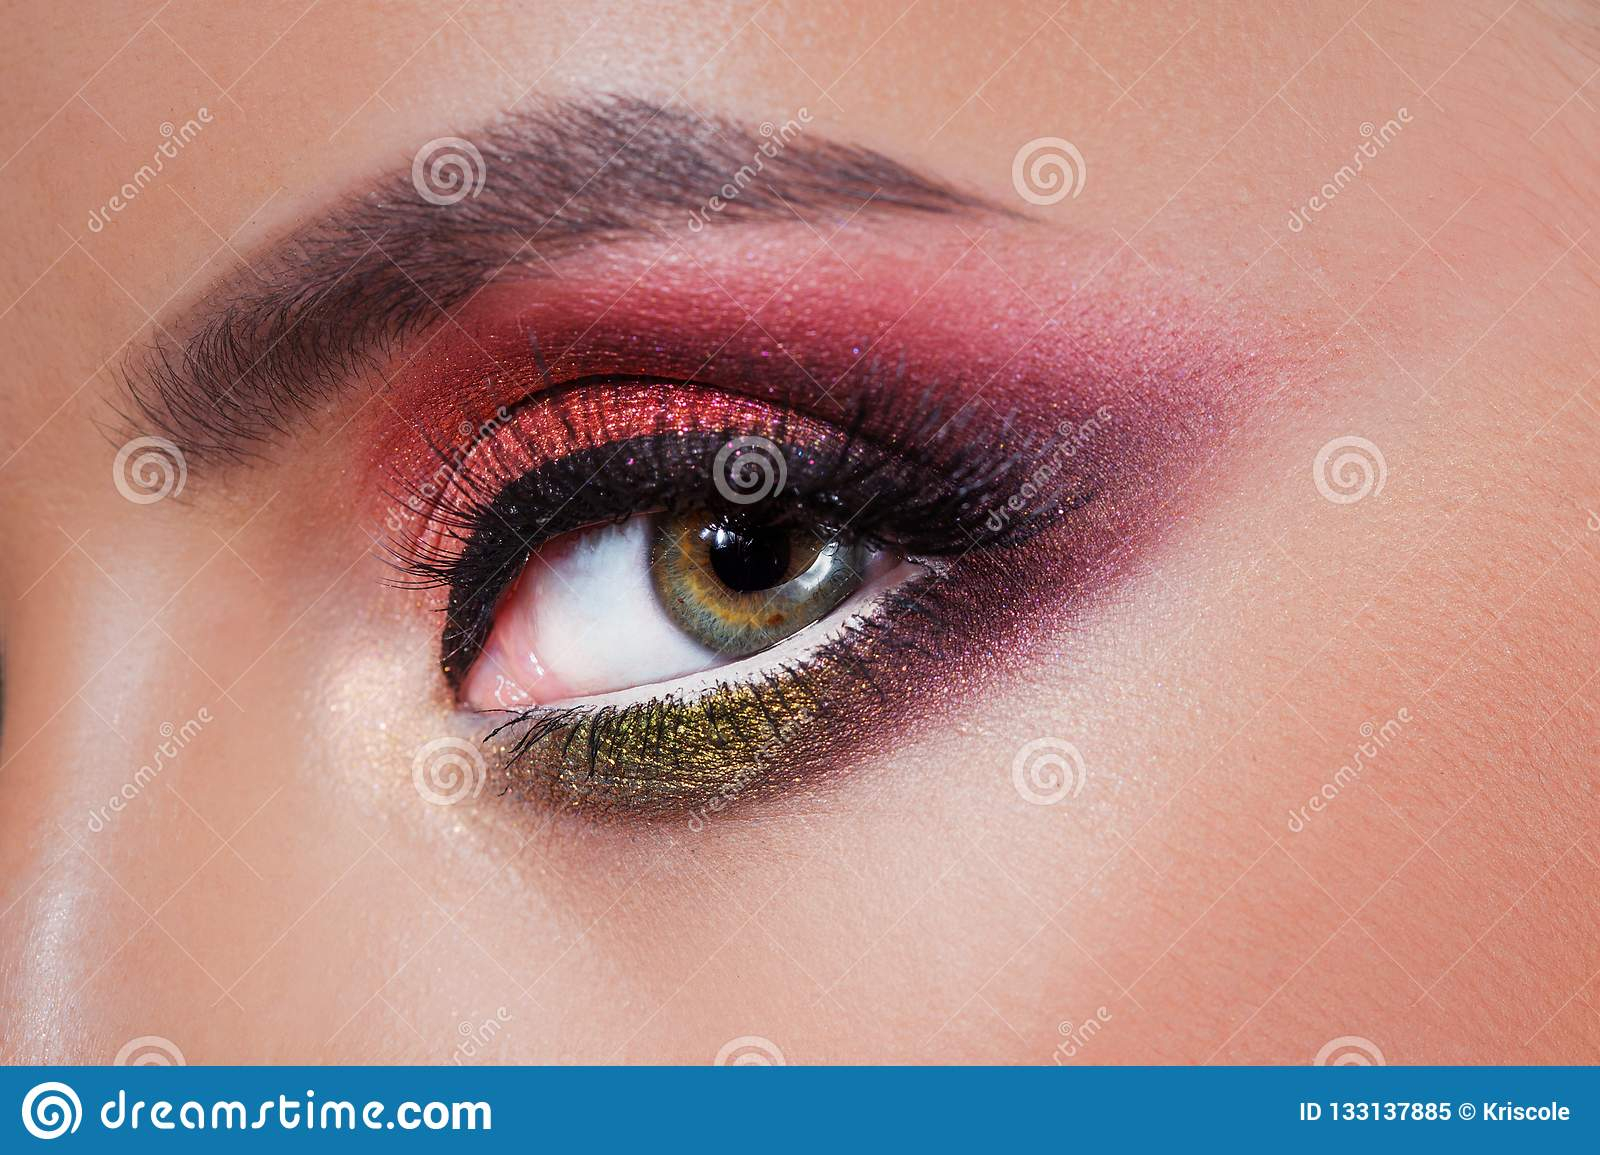 Bright Eye Makeup Amazing Bright Eye Makeup In Luxurious Scarlet Shades Pink And Blue